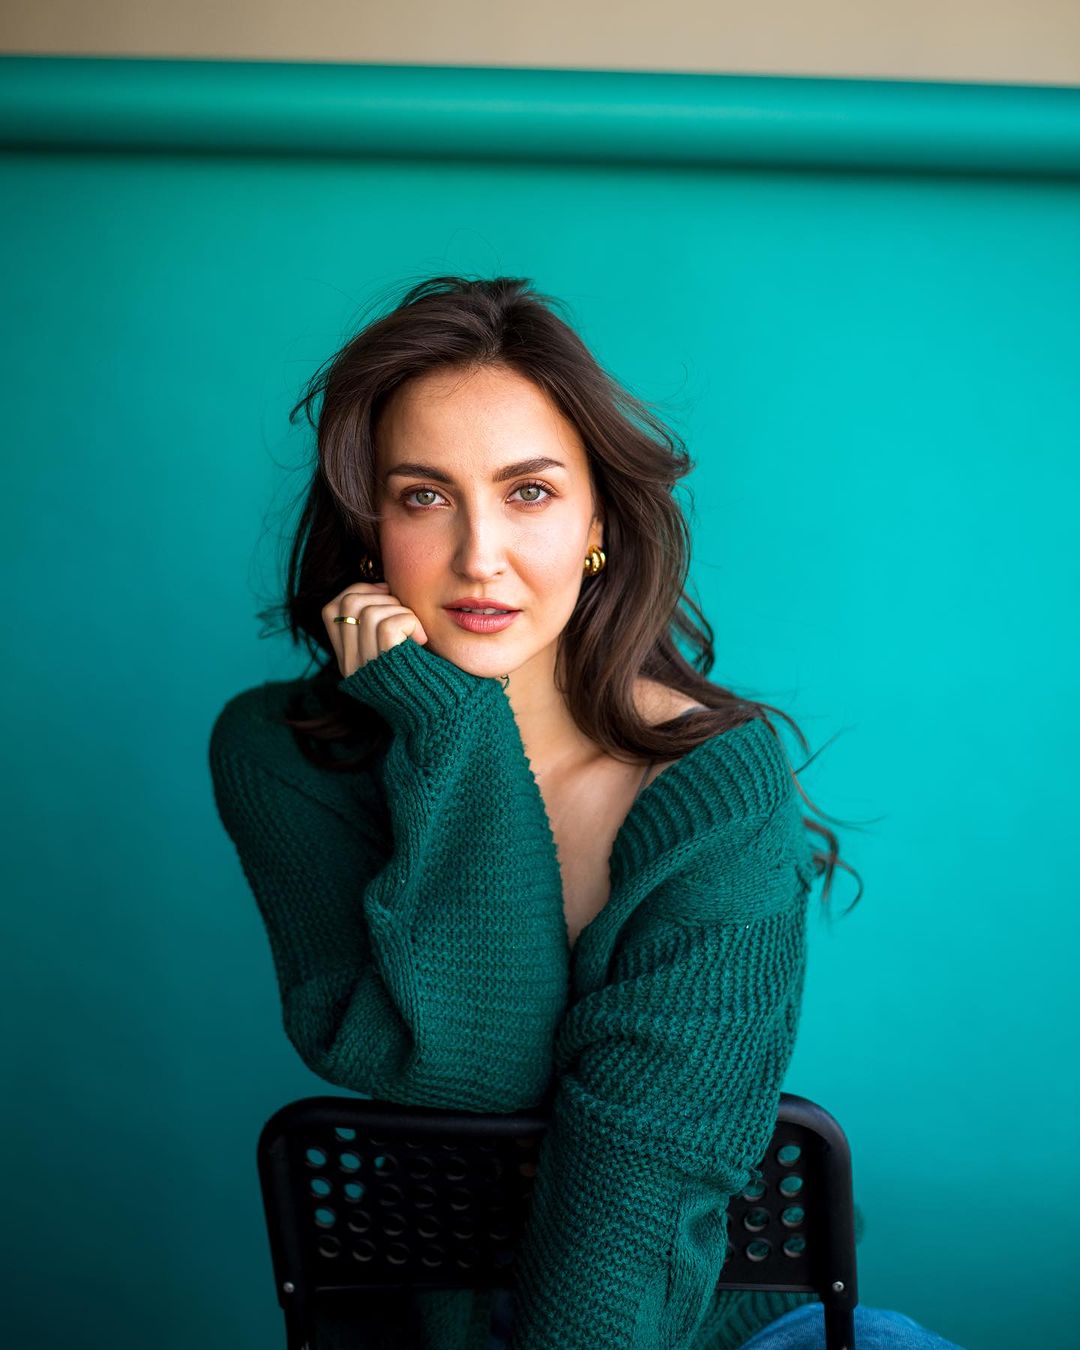 HINDI ACTRESS ELLI AVRRAM IMAGES IN GREEN TOP BLUE JEANS 6